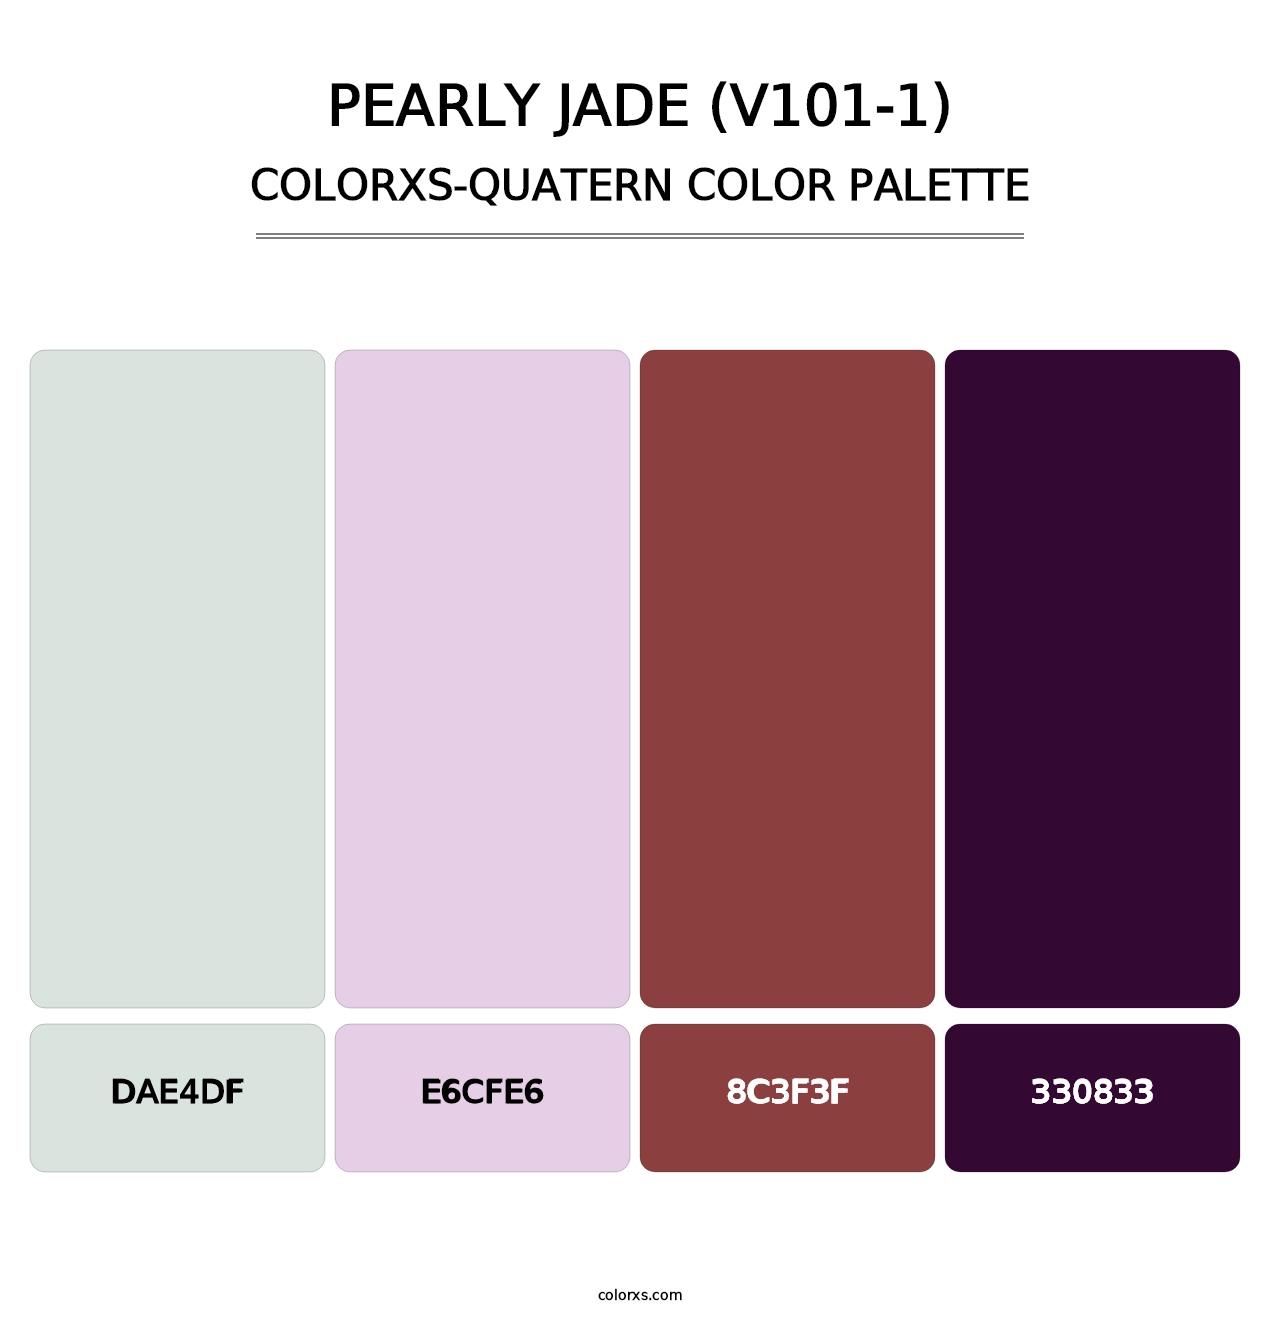 Pearly Jade (V101-1) - Colorxs Quatern Palette